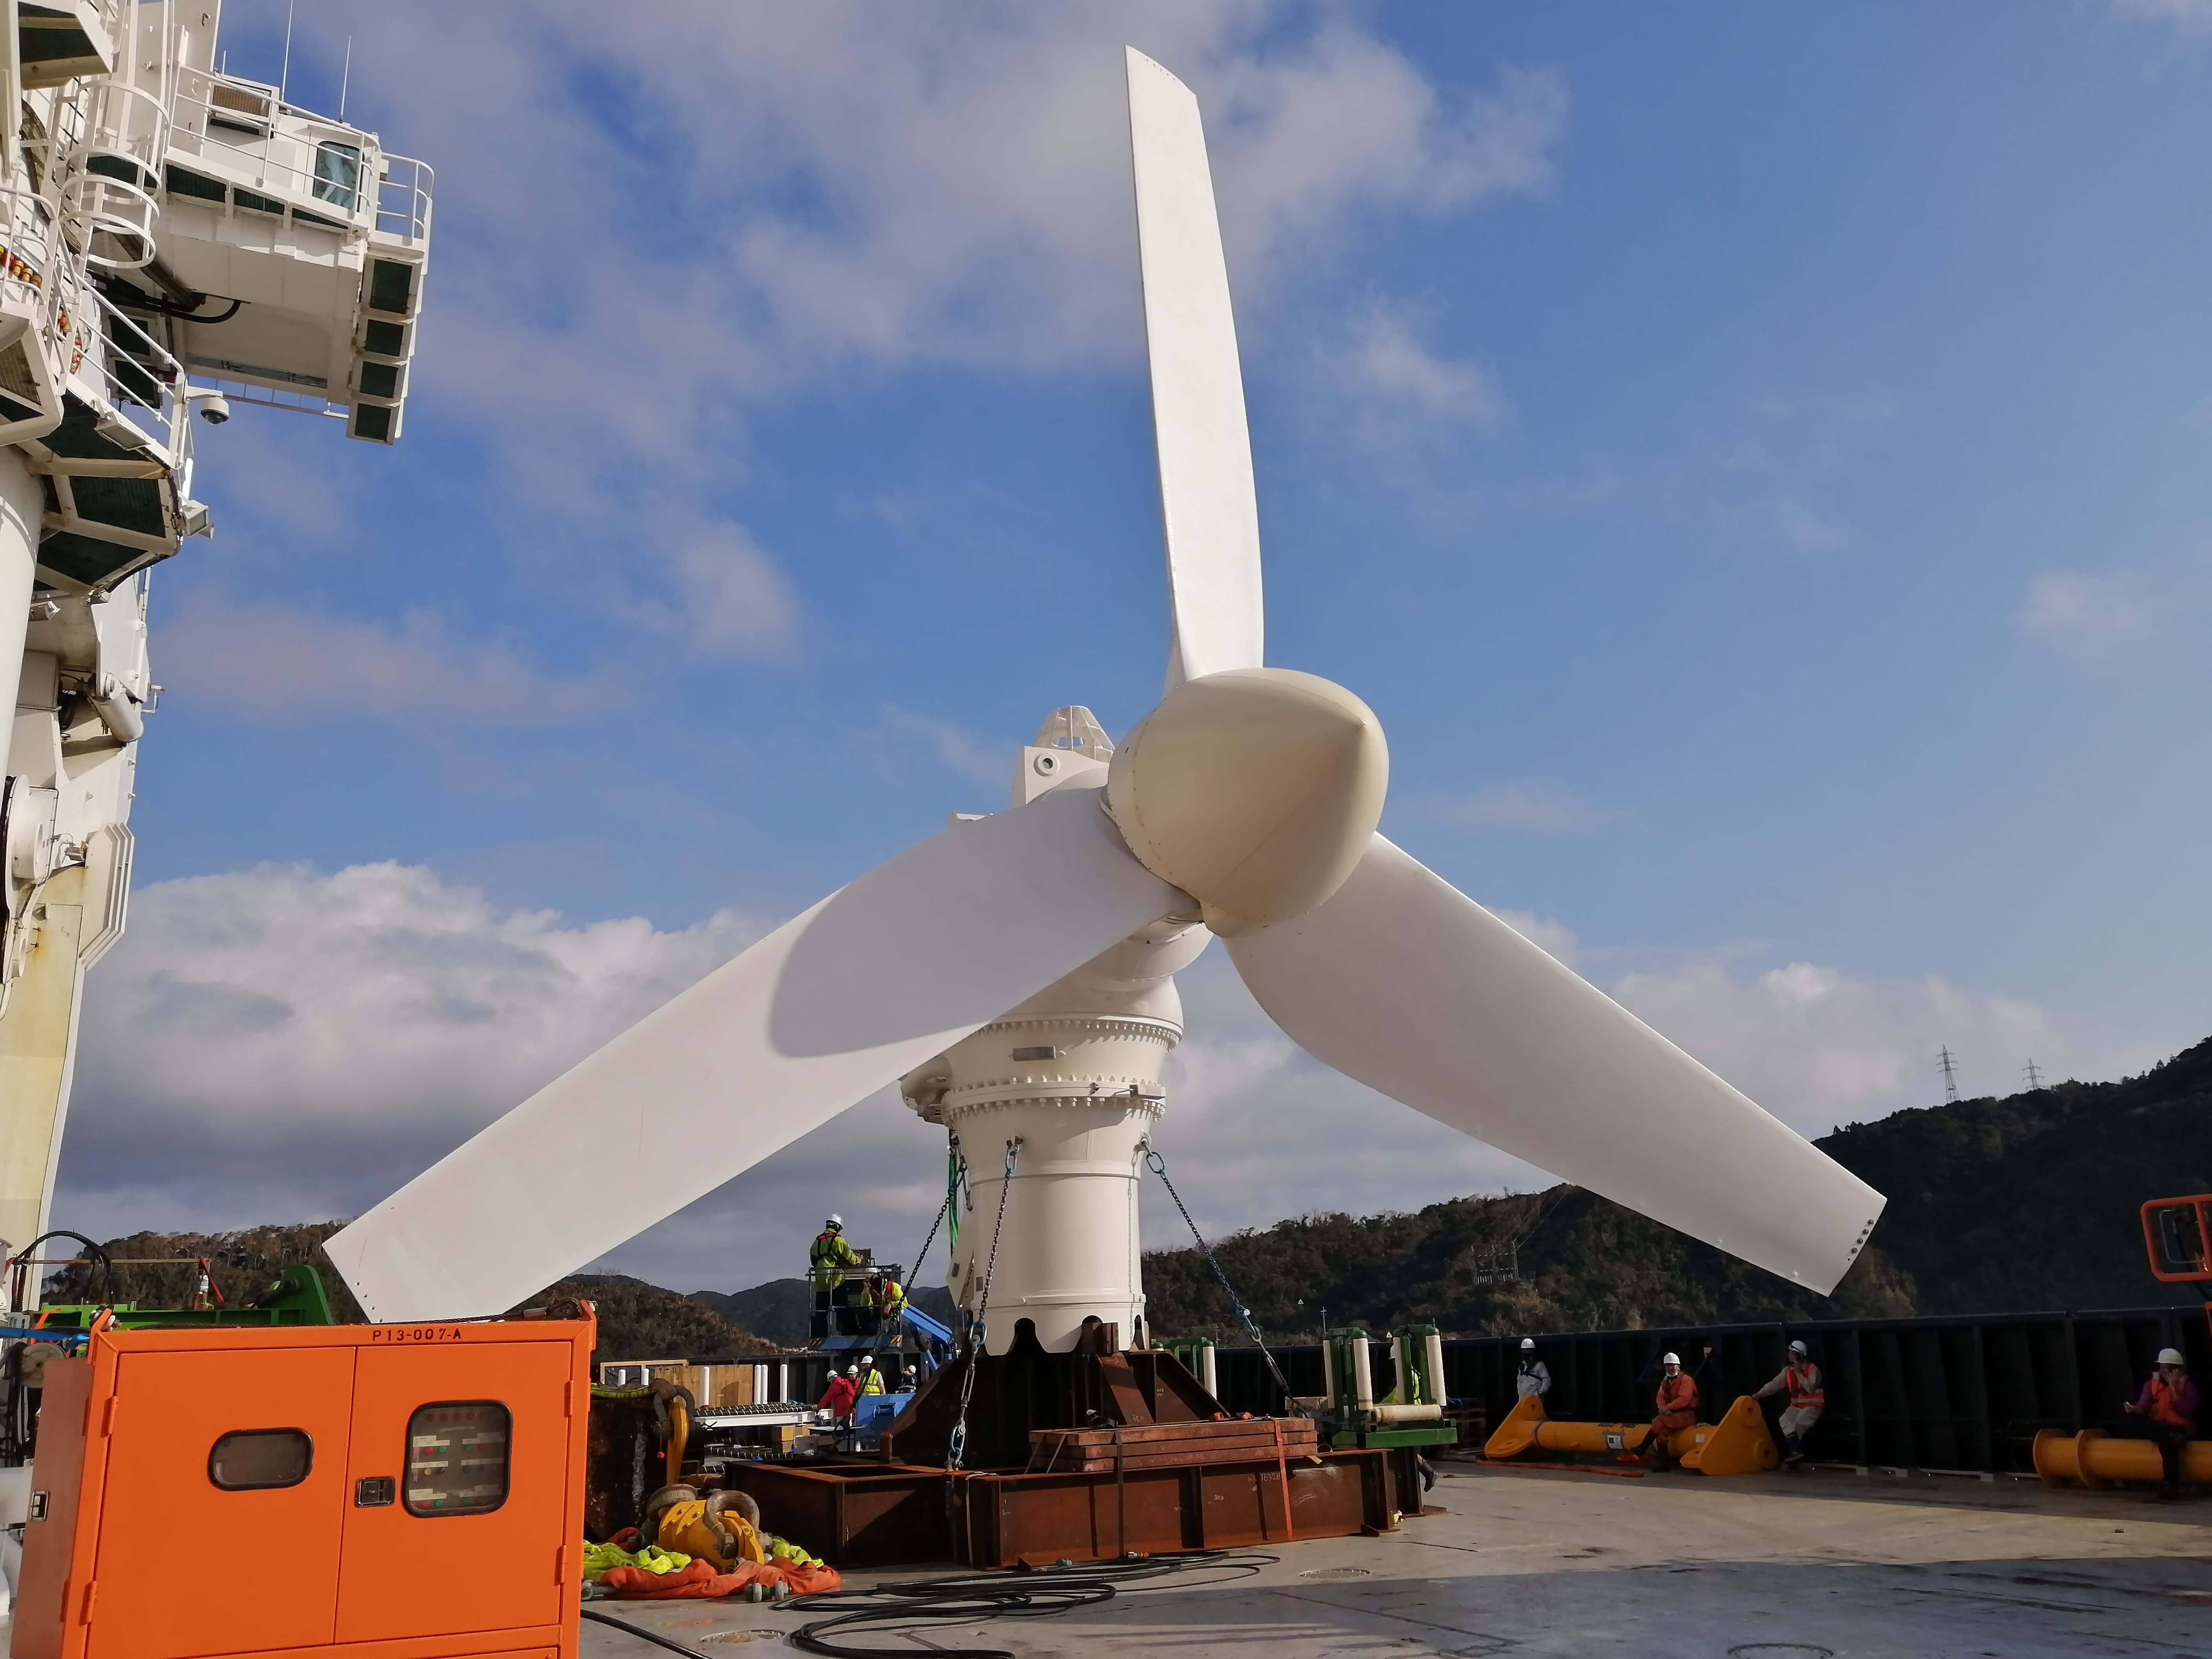 A tidal turbine built in Scotland now produces energy in Japan